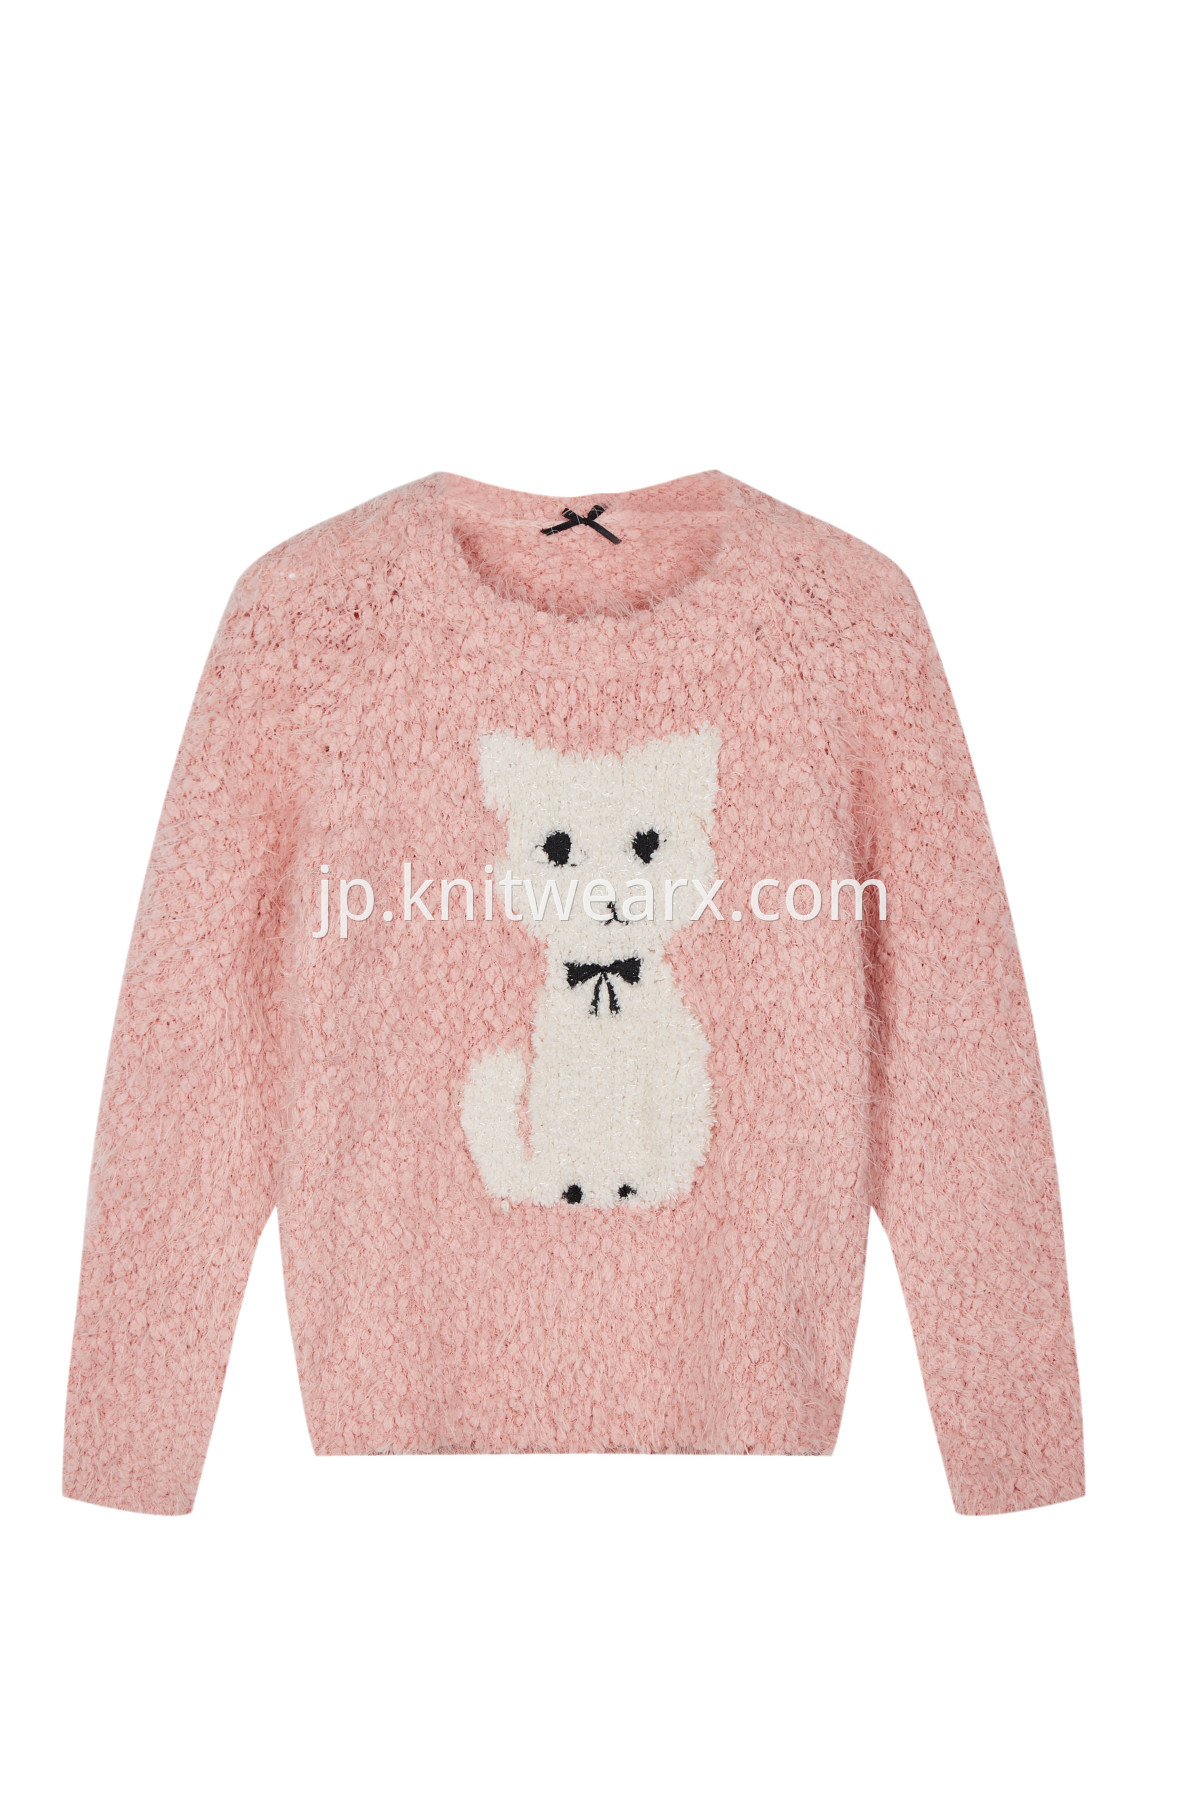 Baby Girl's Warm Knit Knot Feather Yarn Crew Neck Long Sleeves Sweater